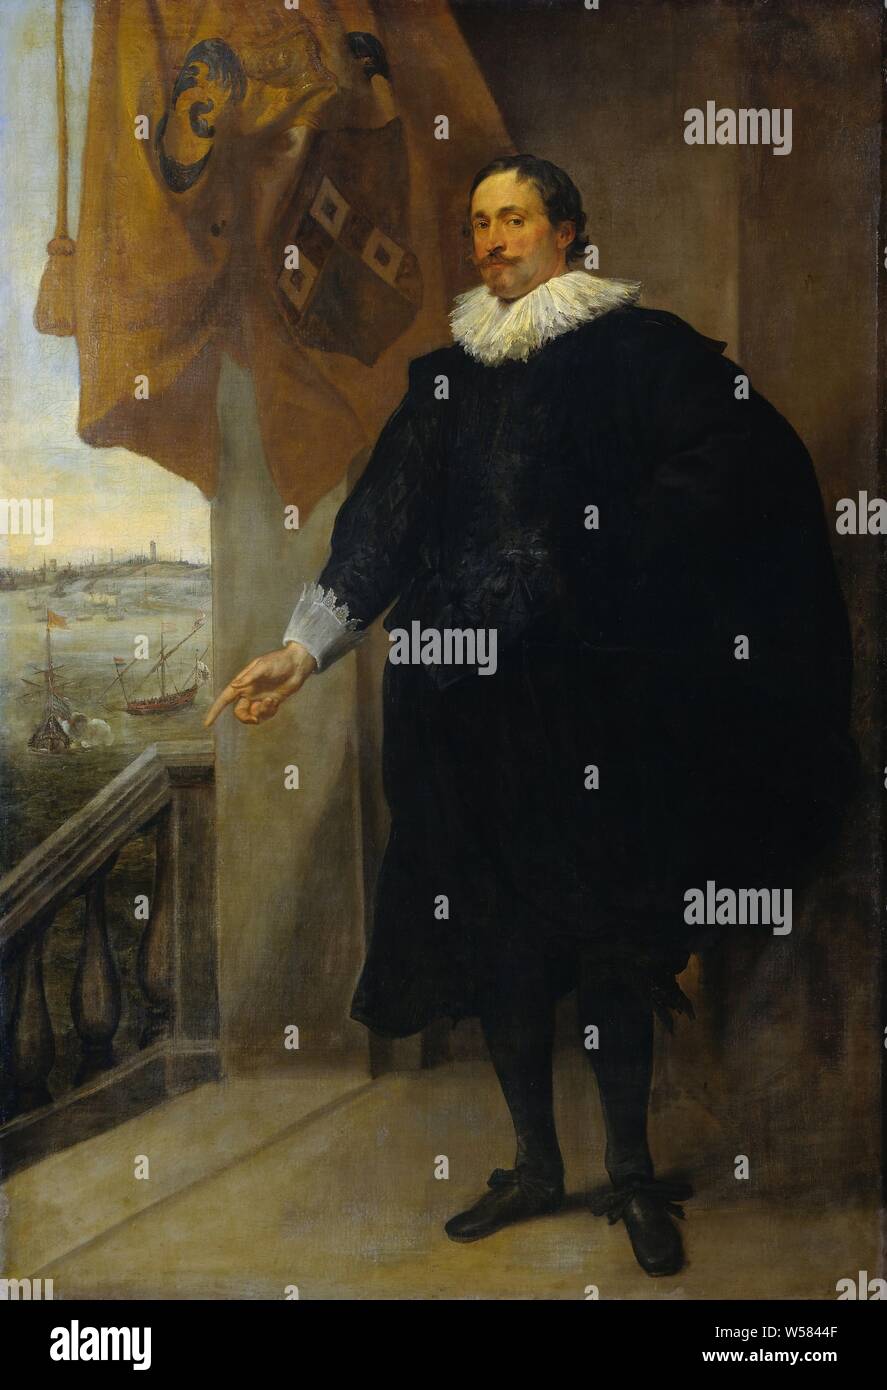 Nicolaes van der Borght, Merchant of Antwerp, Portrait of Nicolaes van der Borght, merchant in Antwerp. Standing, full-length and pointing with the right hand, on a balcony with a staircase and a large curtain. On the left a view of the speech of Dunkirk, historical persons, Dunkirk, Anthony van Dyck, 1625 - 1635, canvas, oil paint (paint), h 201 cm × w 141 cm d 8 cm Stock Photo